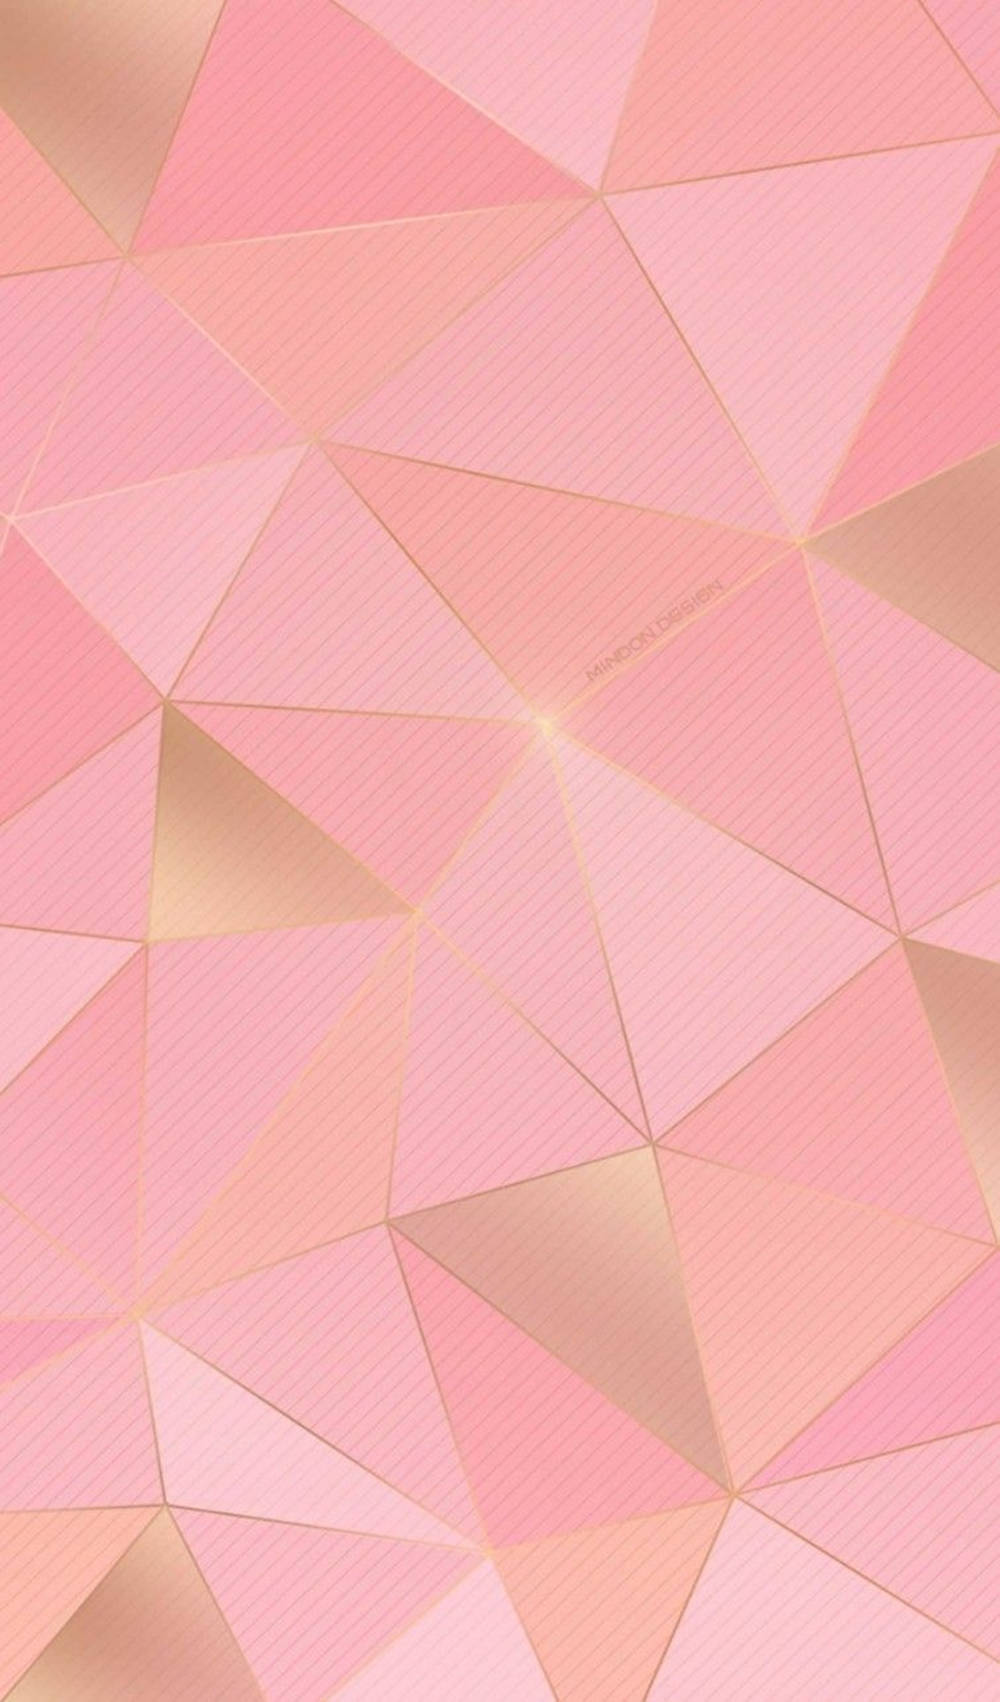 Stunning Rose Gold Ipad Displayed Amidst Intricate Geometric Triangles Wallpaper